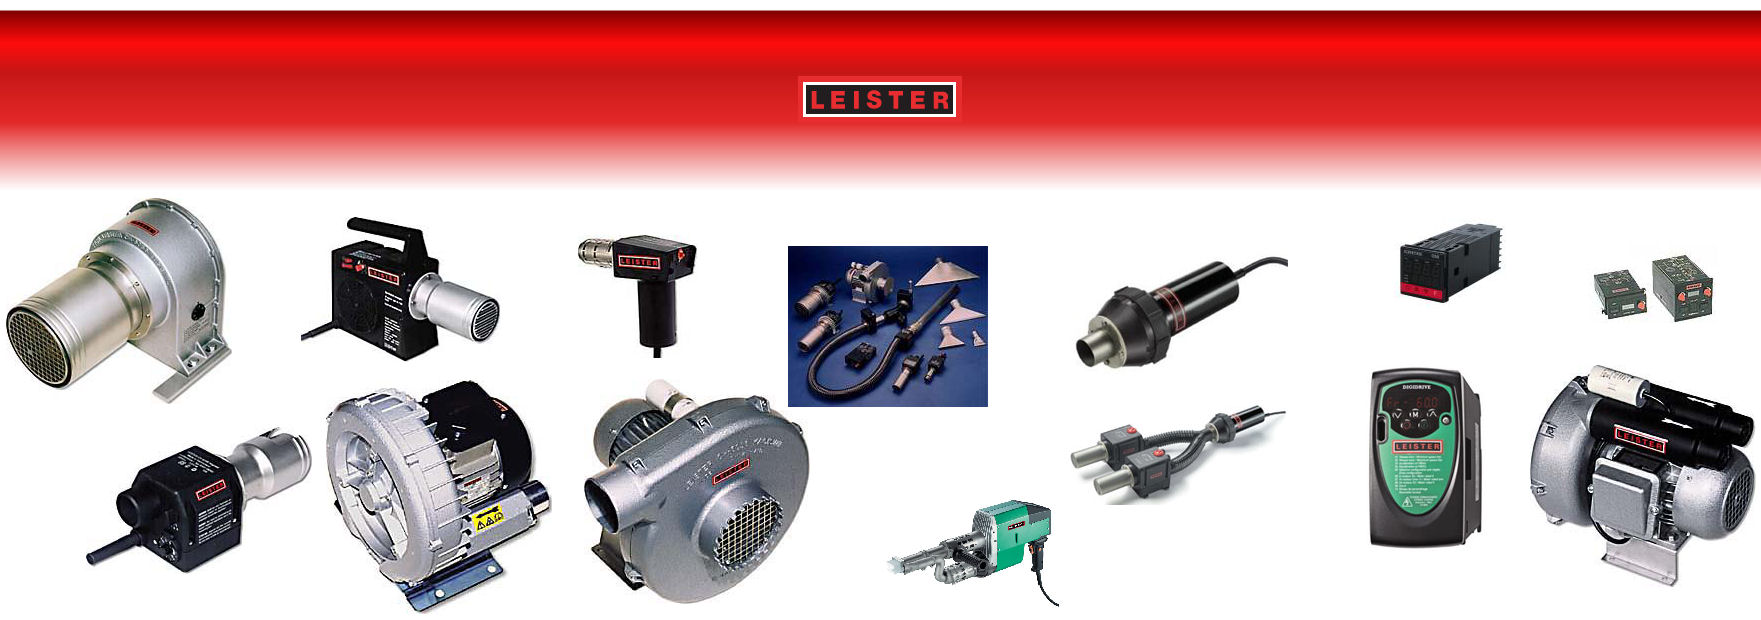 Leister Hot Air Tools